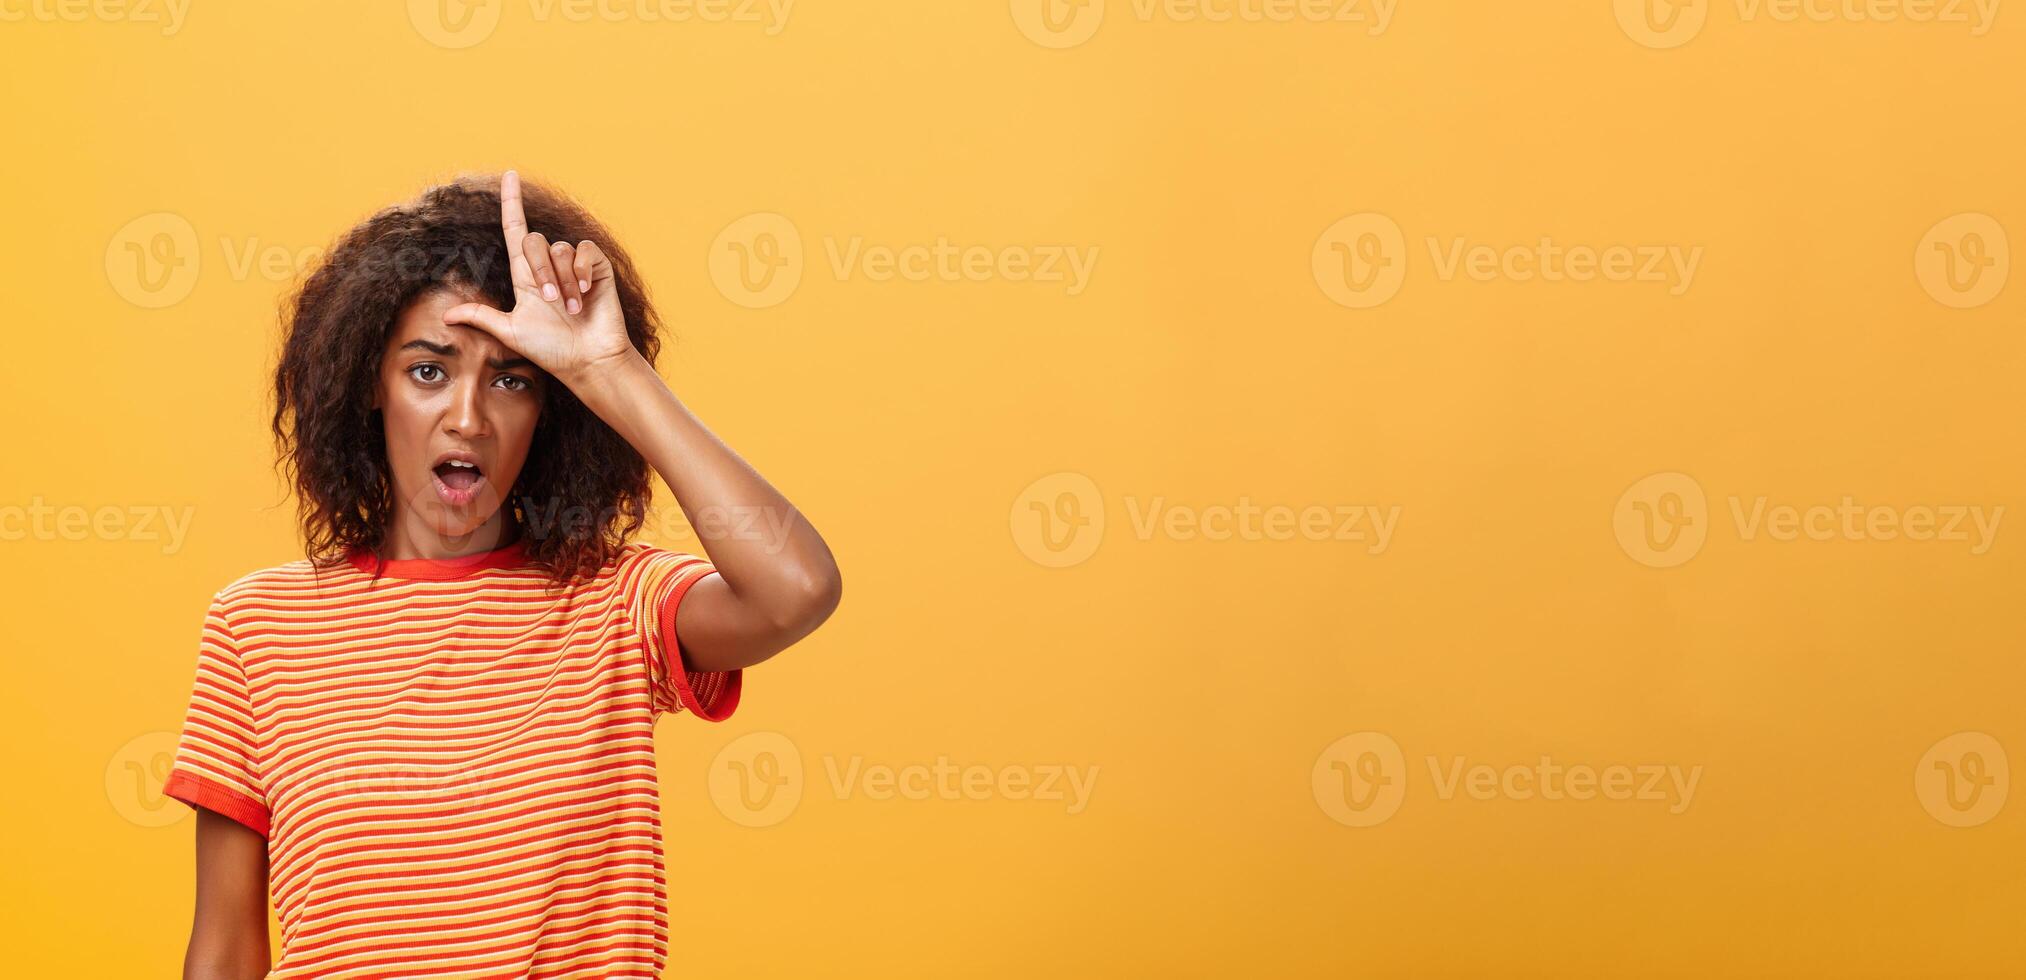 Girl thinks she loser. Portrait of gloomy bothered and displeased african american woman with afro hairstyle showing l word over forehead complaining feeling gloomy and unhappy over orange background photo